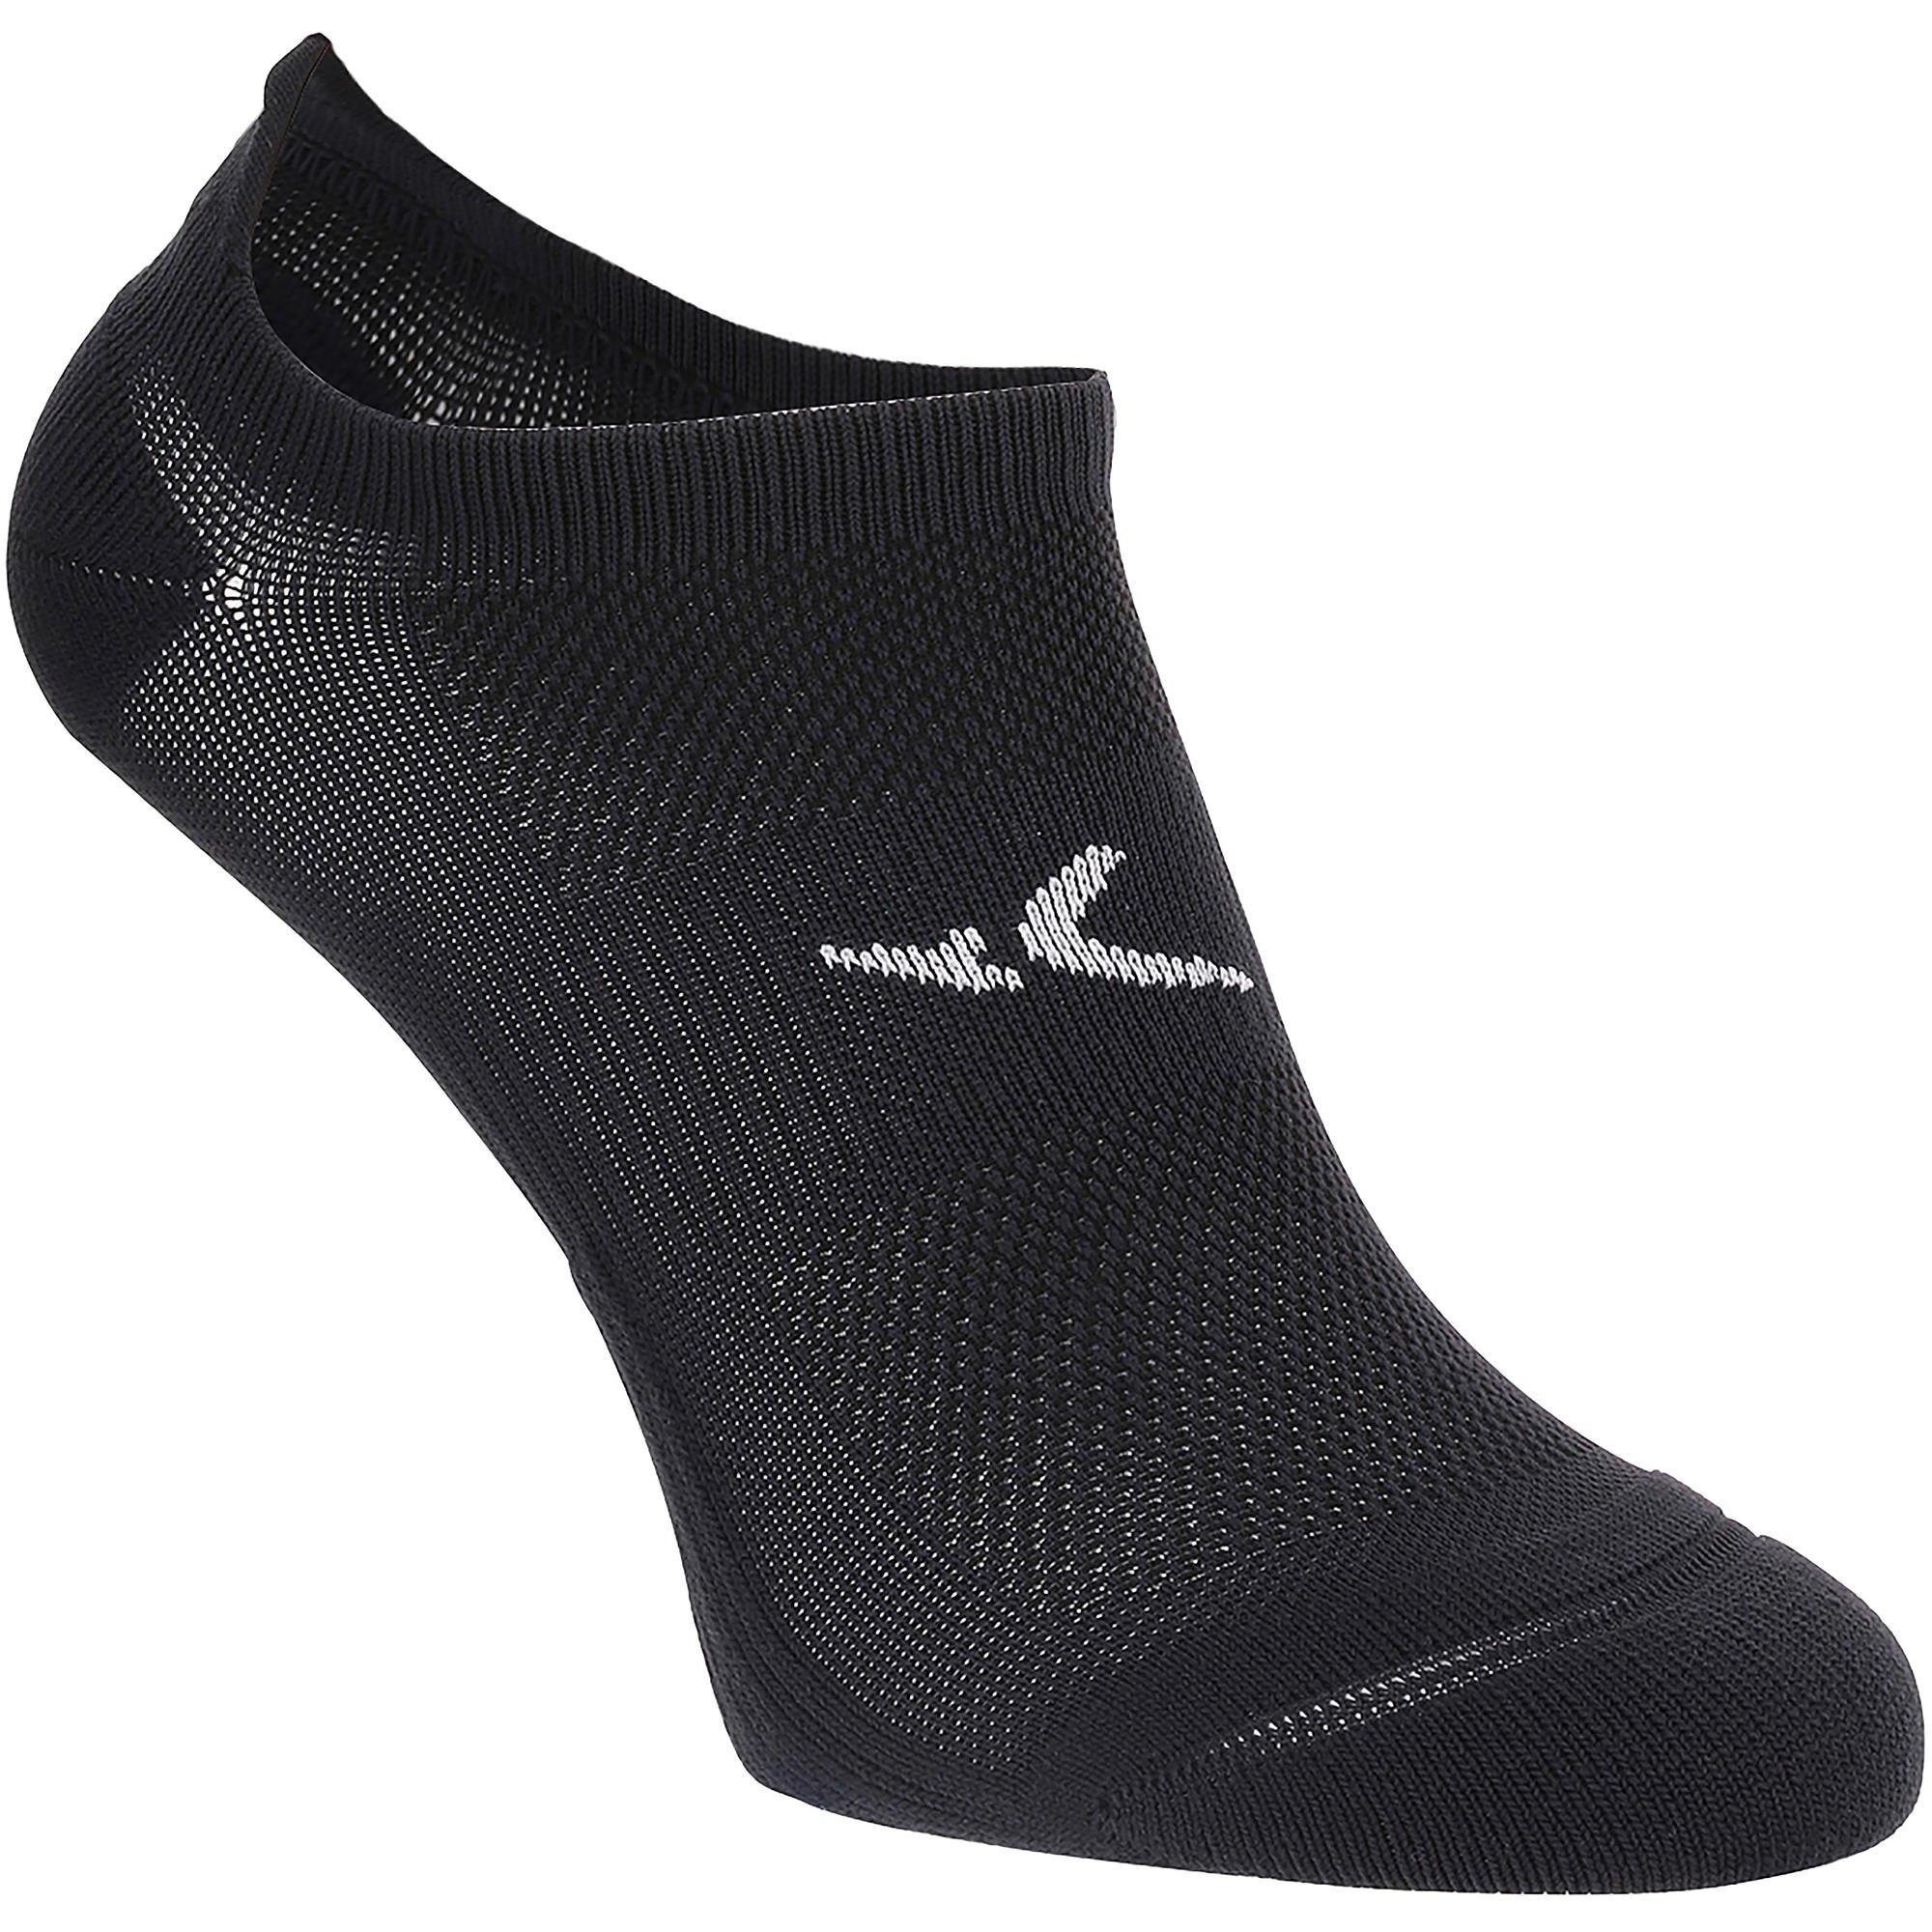 Decathlon Invisible Fitness Cardio Training Socks Twin-Pack